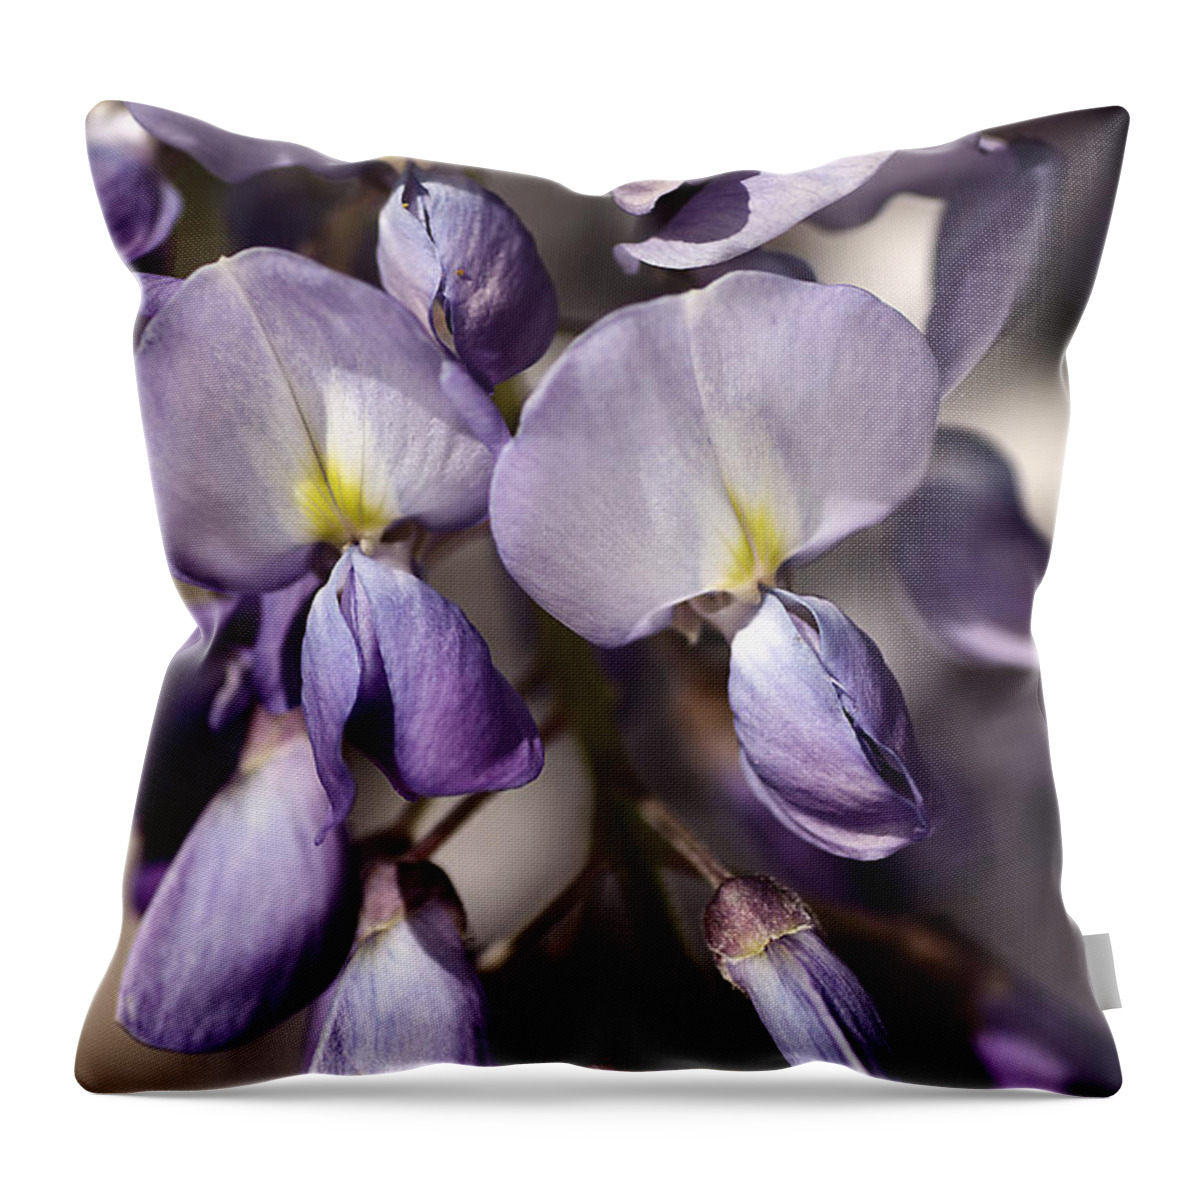 Wisteria Throw Pillow featuring the photograph Purple Of Wisteria by Joy Watson